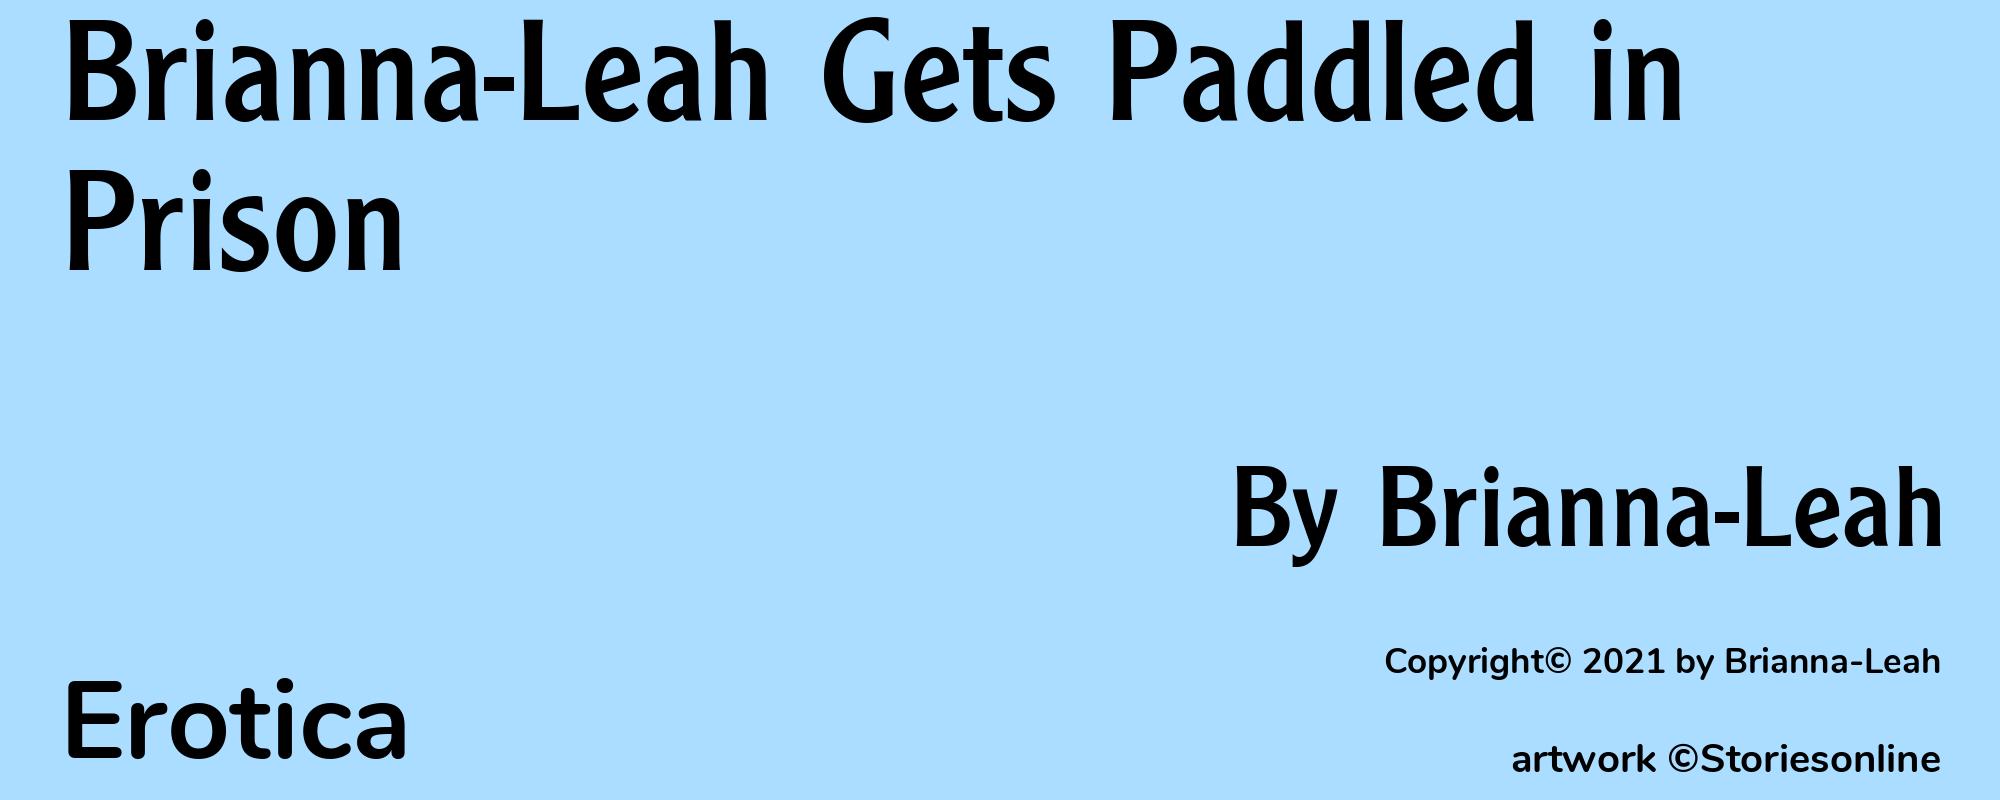 Brianna-Leah Gets Paddled in Prison - Cover